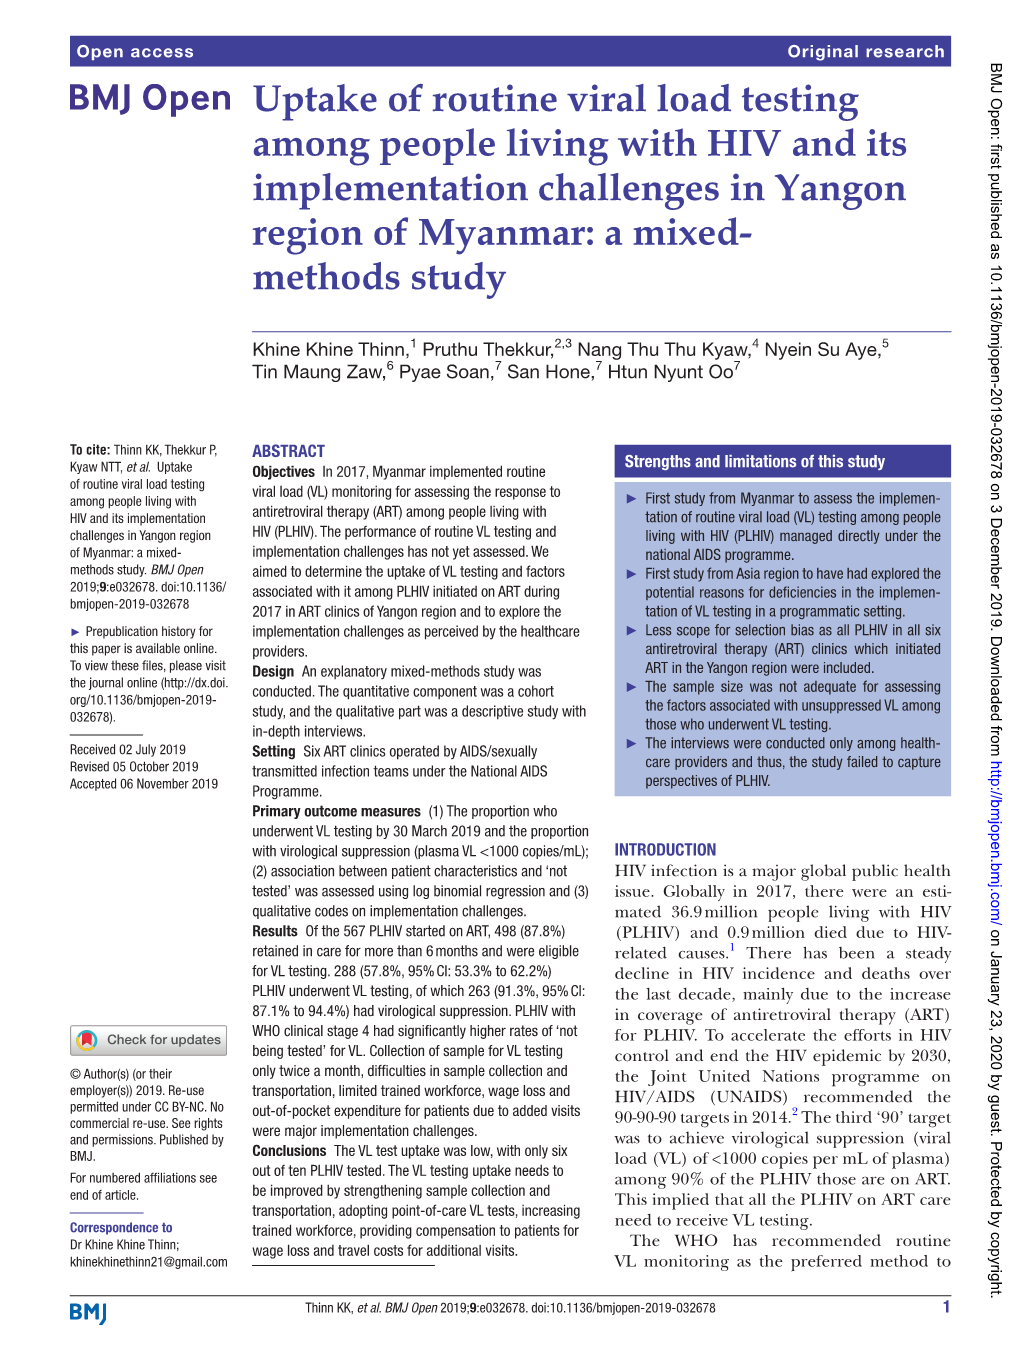 Uptake of Routine Viral Load Testing Among People Living with HIV and Its Implementation Challenges in Yangon Region of Myanmar: a Mixed-­ Methods Study